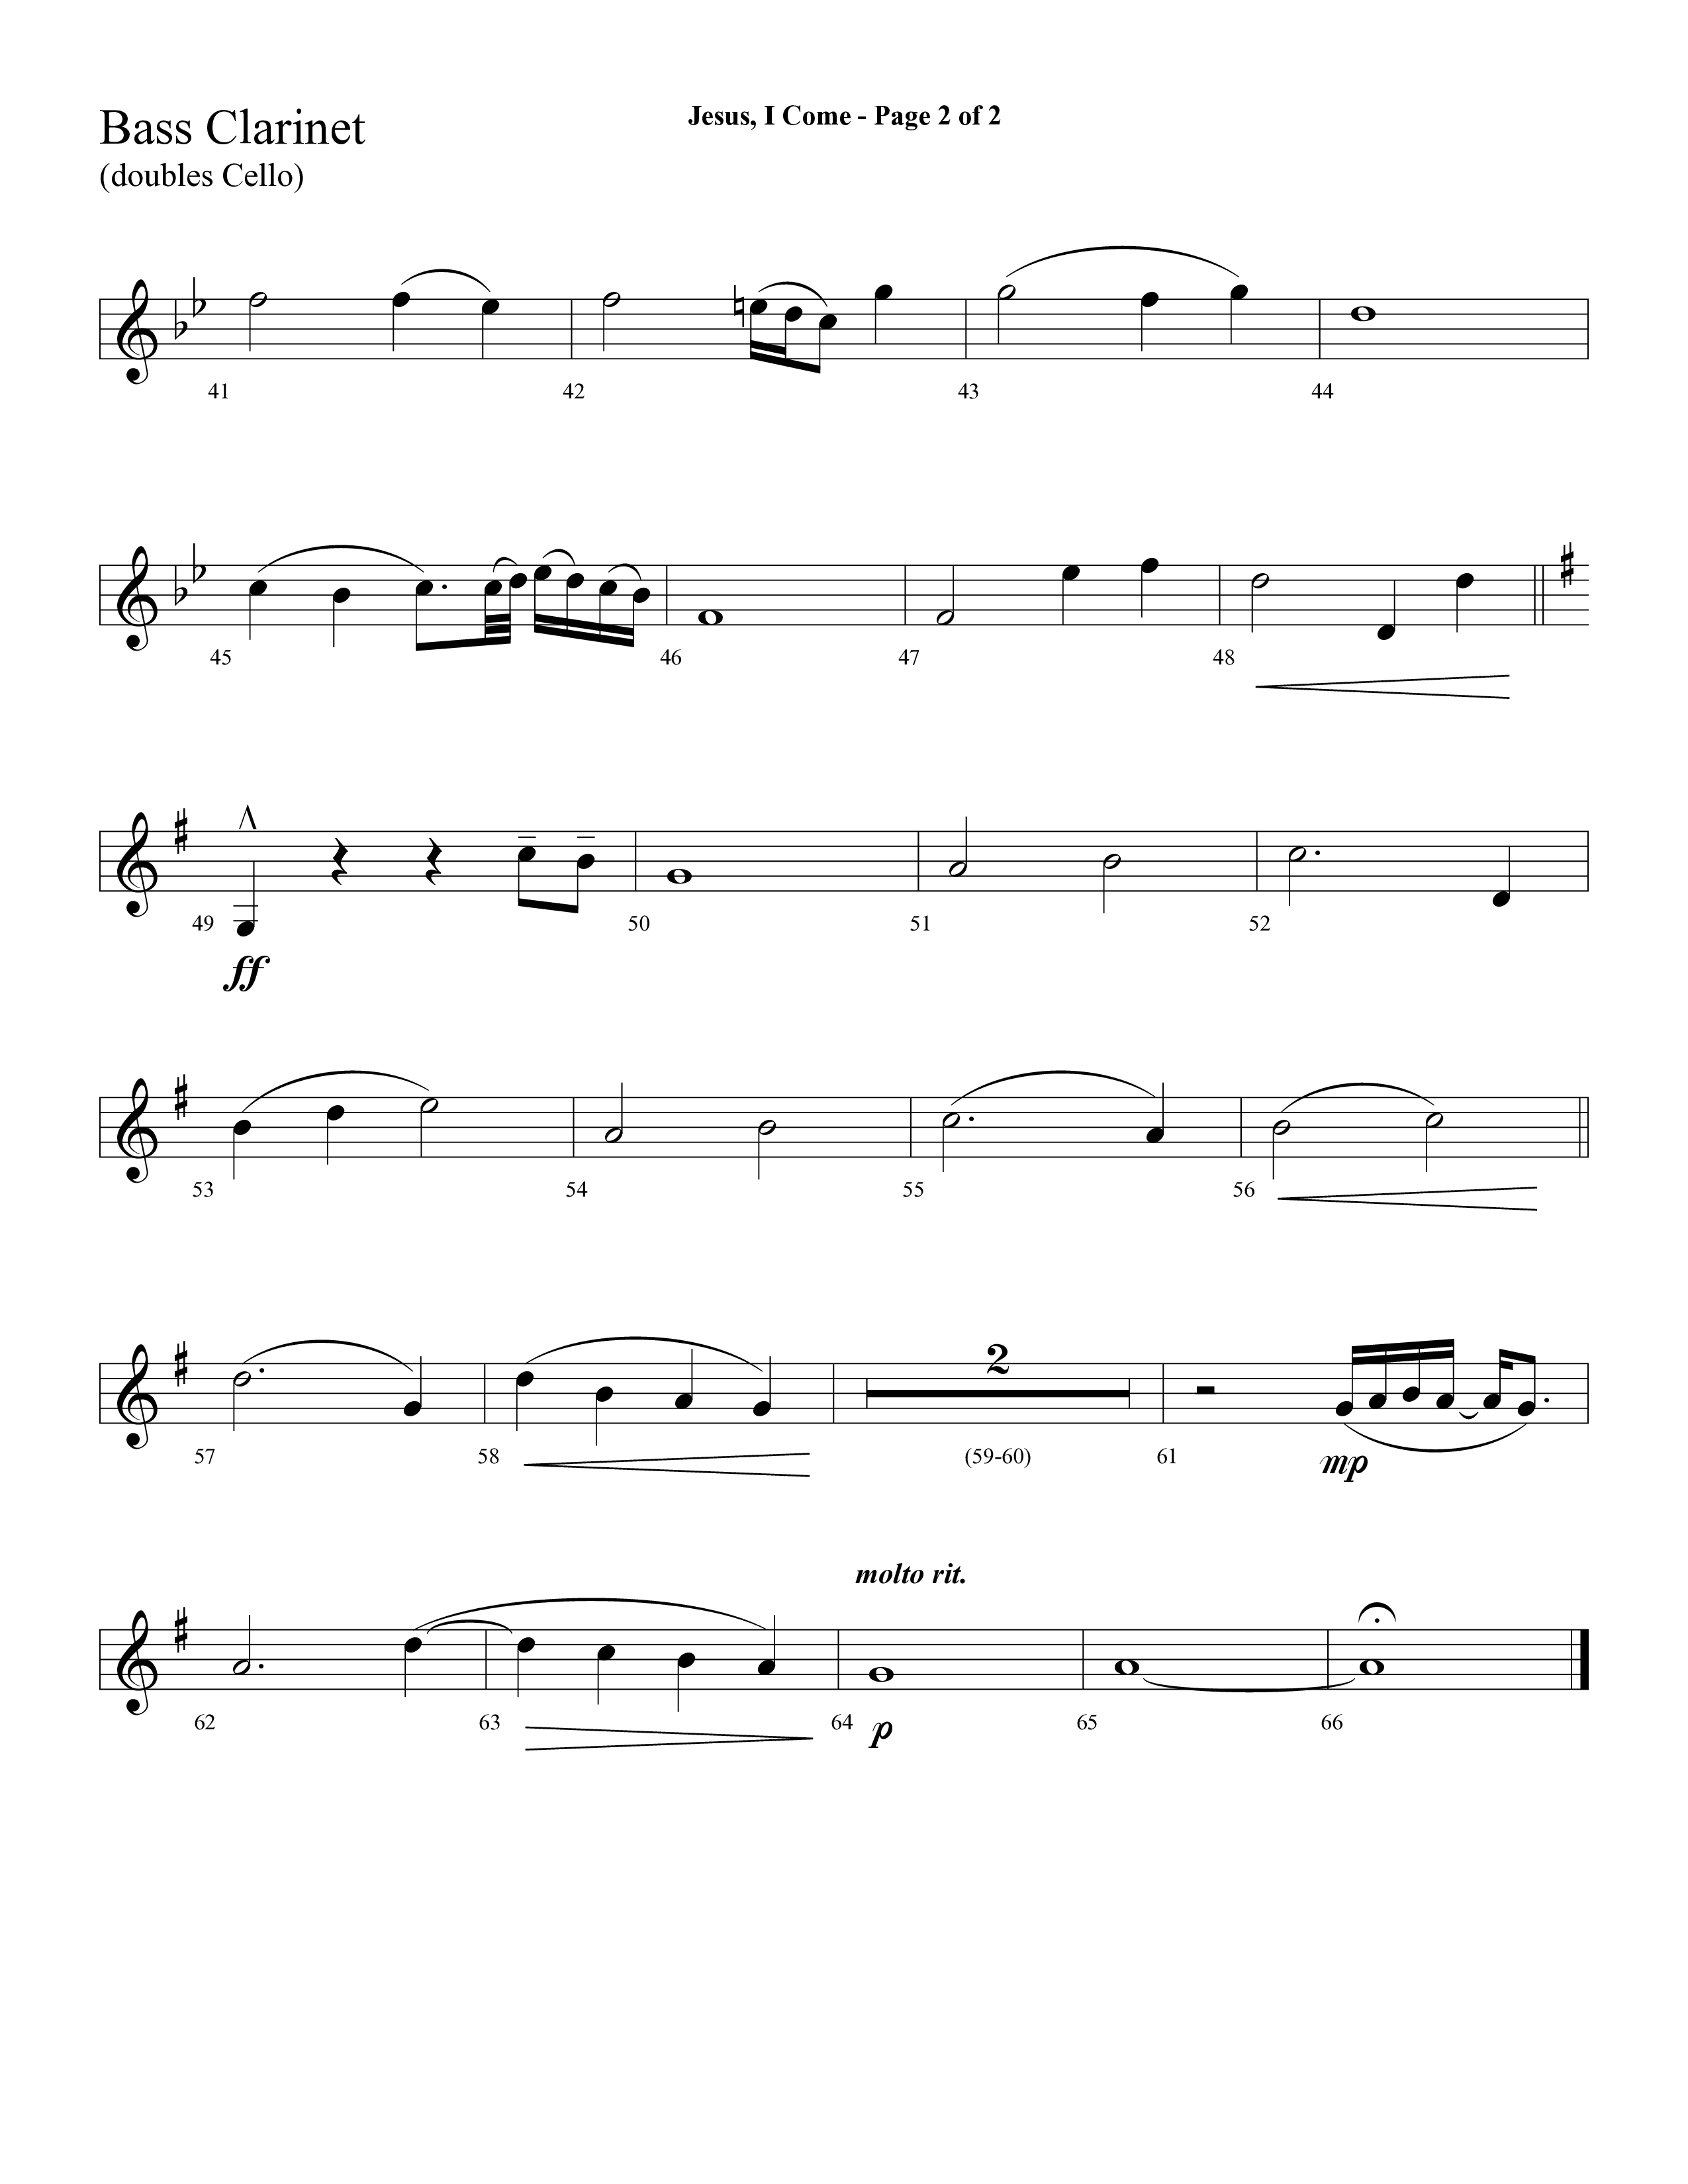 Jesus I Come (with Pass Me Not) (Choral Anthem SATB) Bass Clarinet (Lifeway Choral / Arr. Cliff Duren)